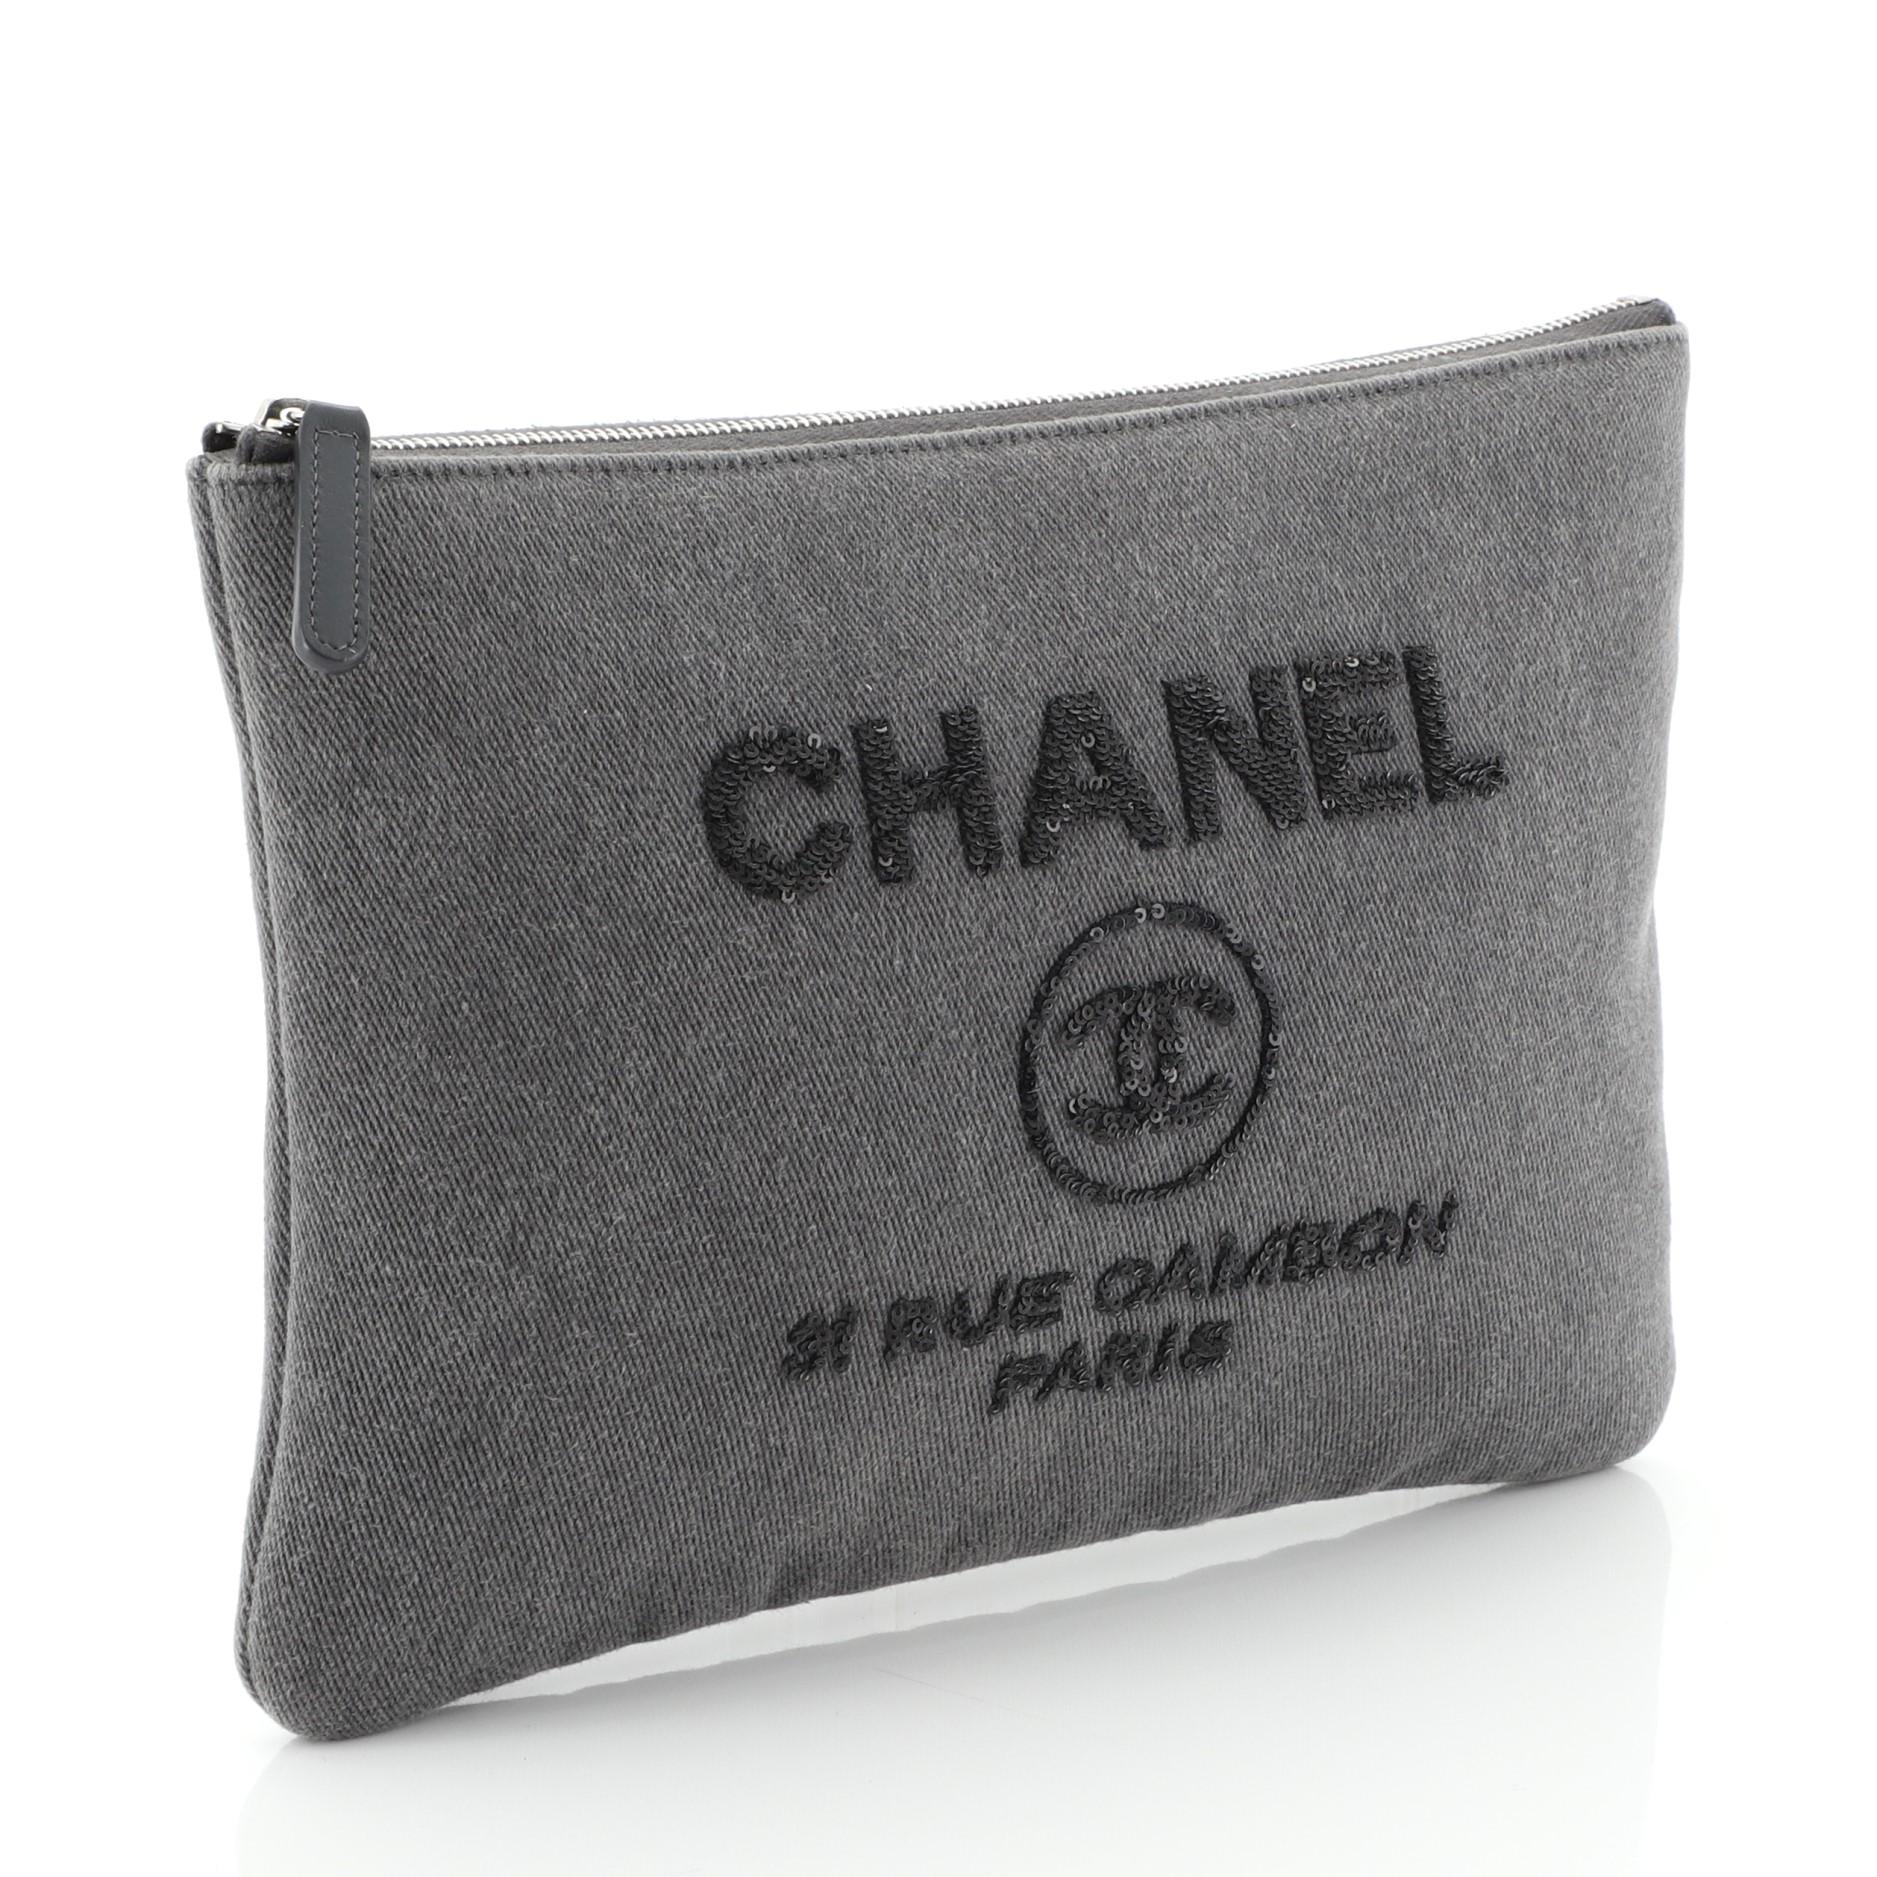 This Chanel Deauville Pouch Denim with Sequins Medium, crafted from gray denim, feature sequin Chanel logo detailing and silver-tone hardware. Its top zip closure opens to a gray nylon interior. Hologram sticker reads: 24126986. **Note: Shoe